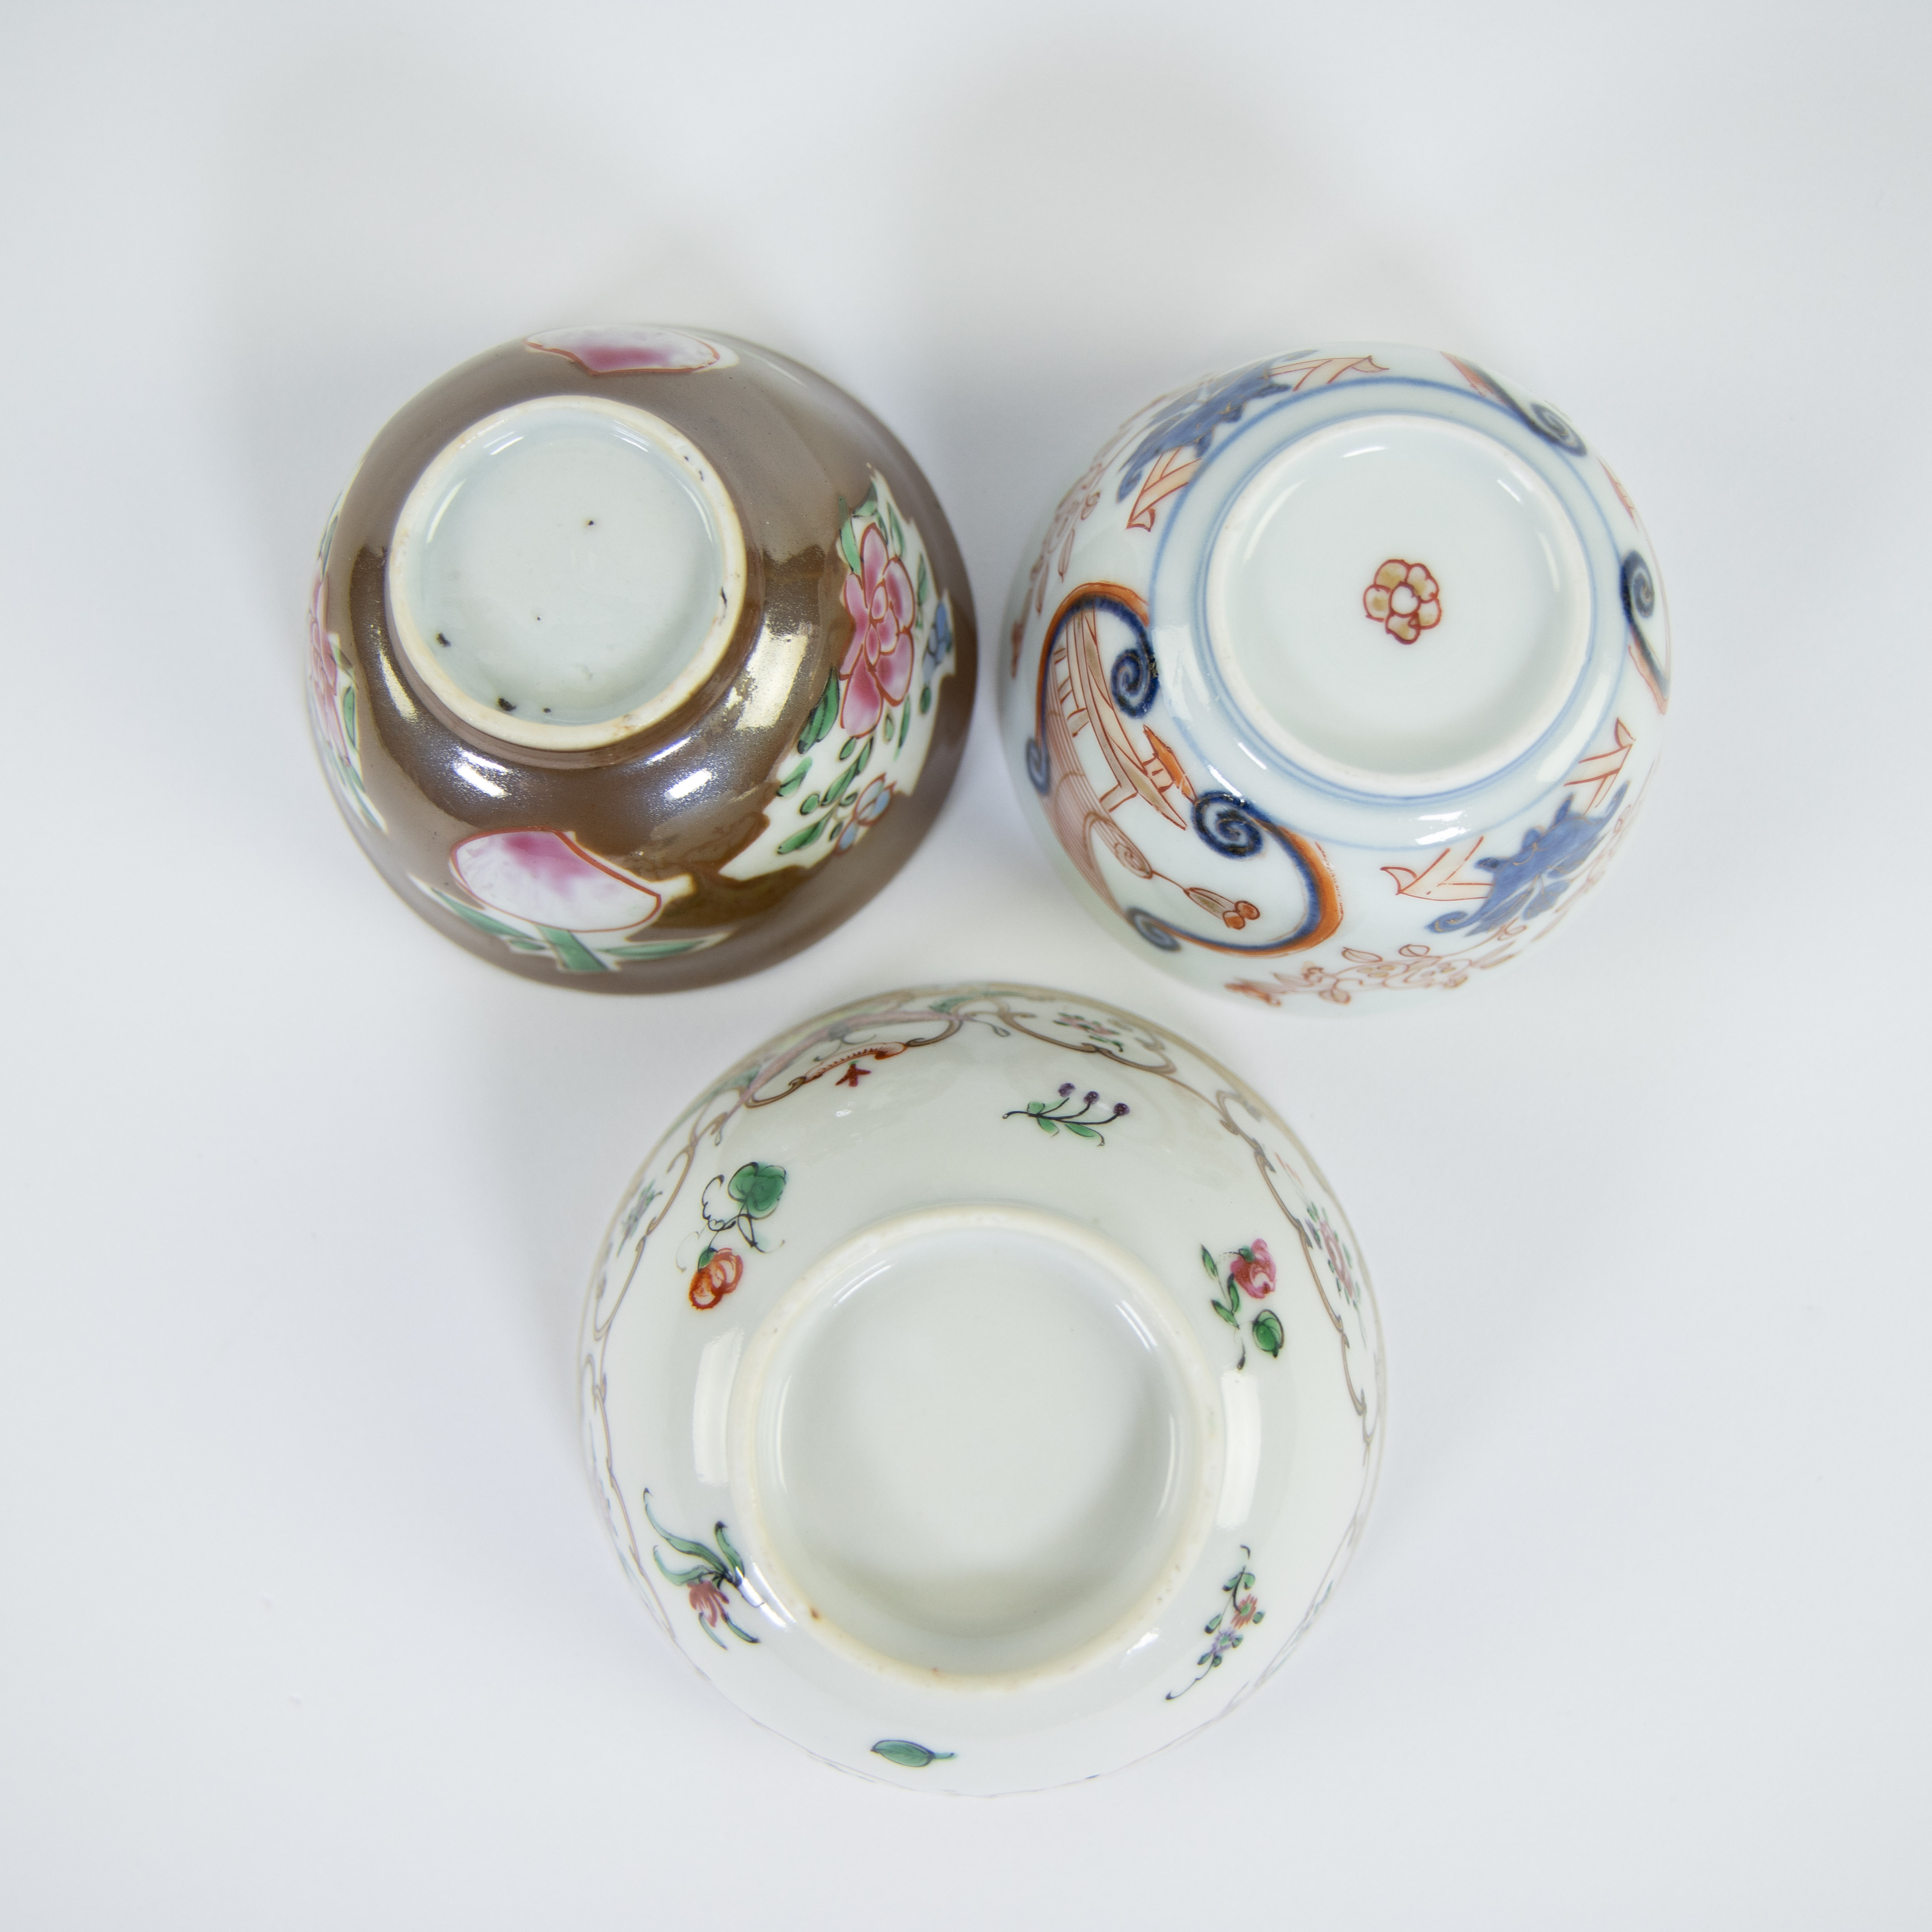 Collection of Chinese porcelain 18th/19th century, famille rose, Imari - Image 10 of 10